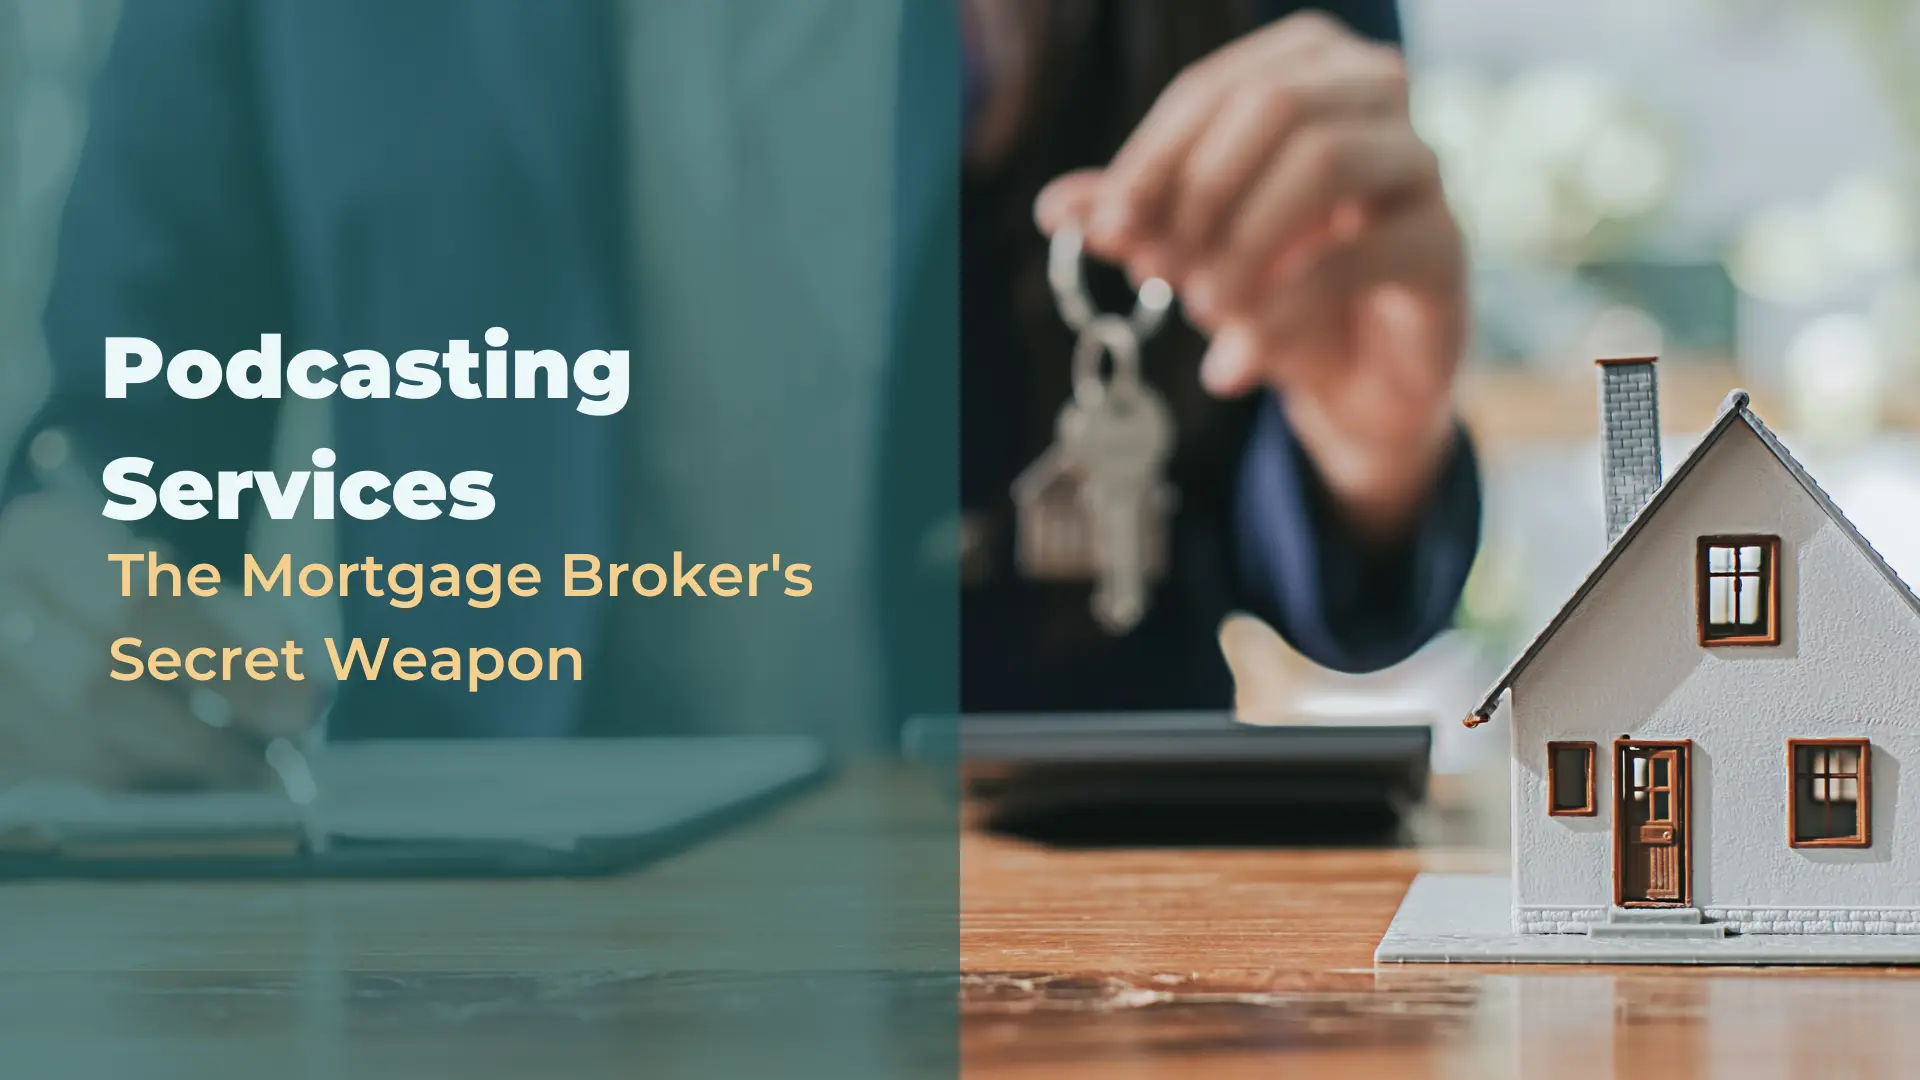 Podcasting Services - The Mortgage Broker's Secret Weapon